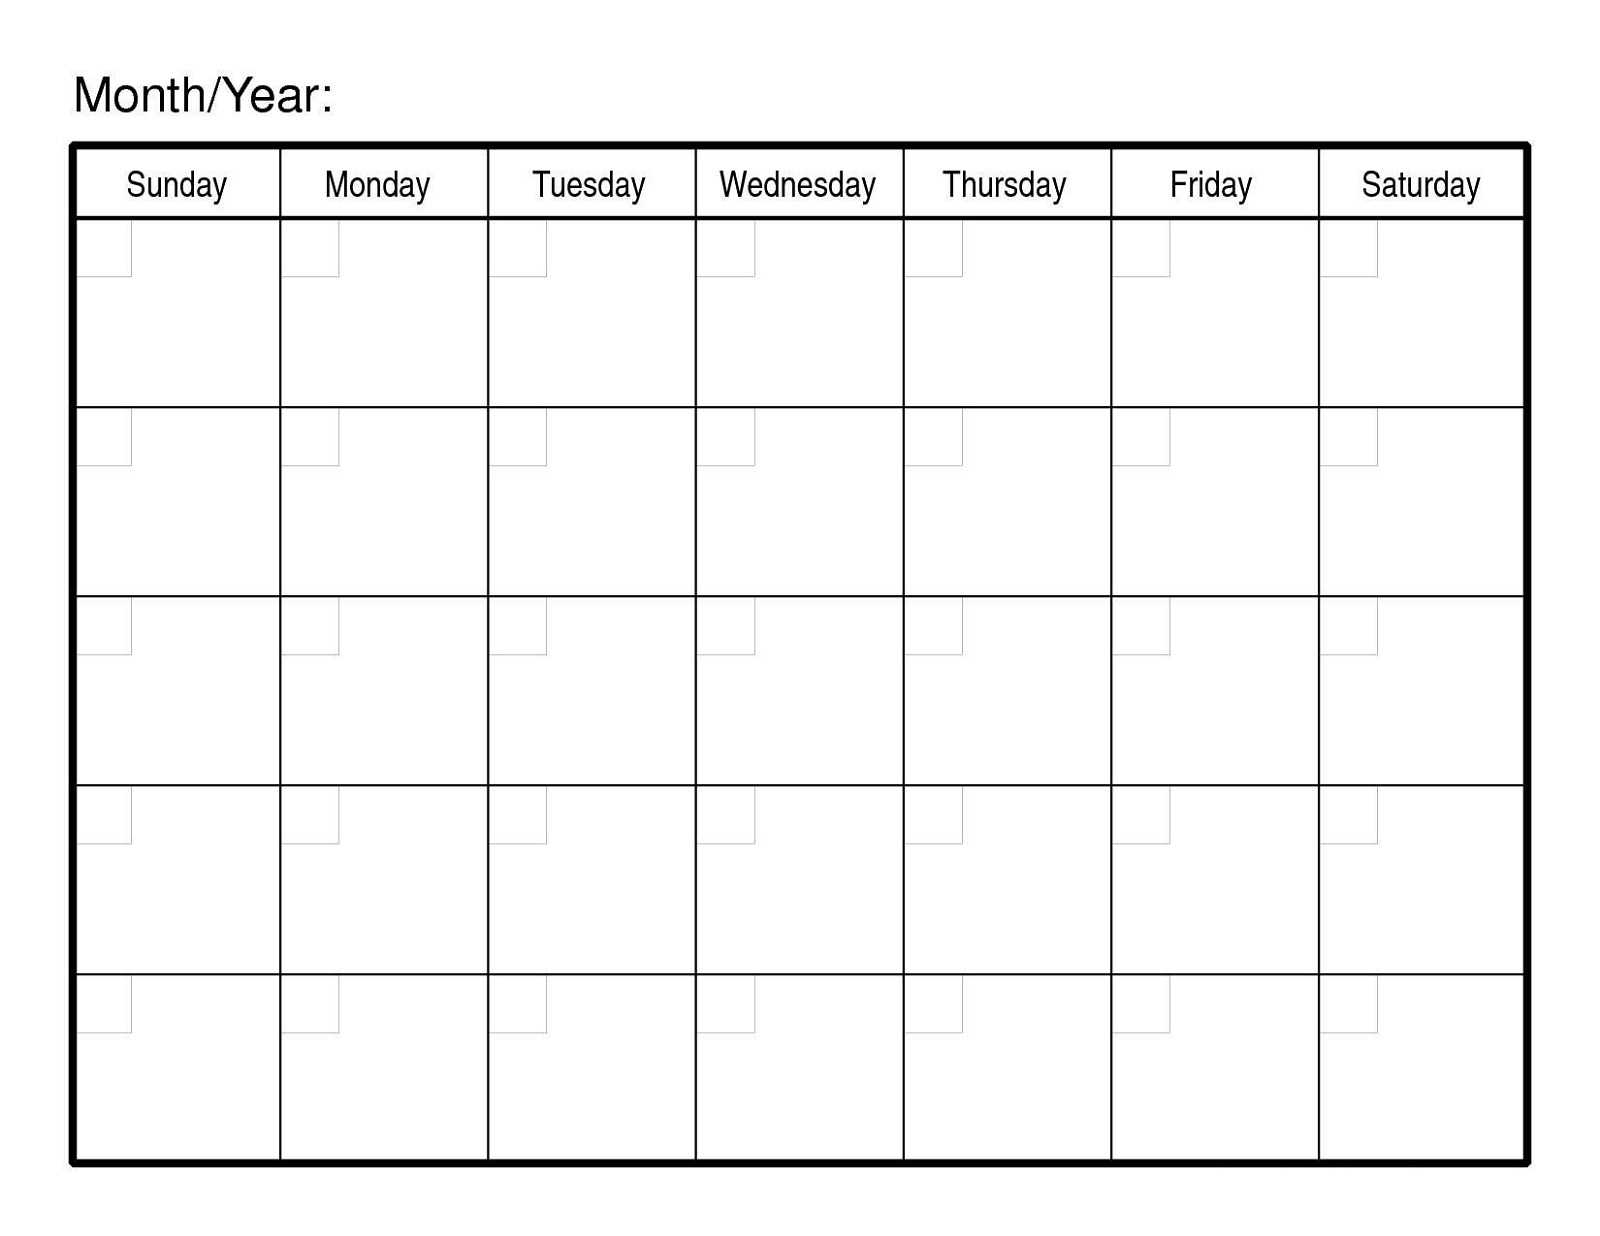 Month At A Glance Calendar Printable Blank Downloadable Within Month At A Glance Blank Calendar Template